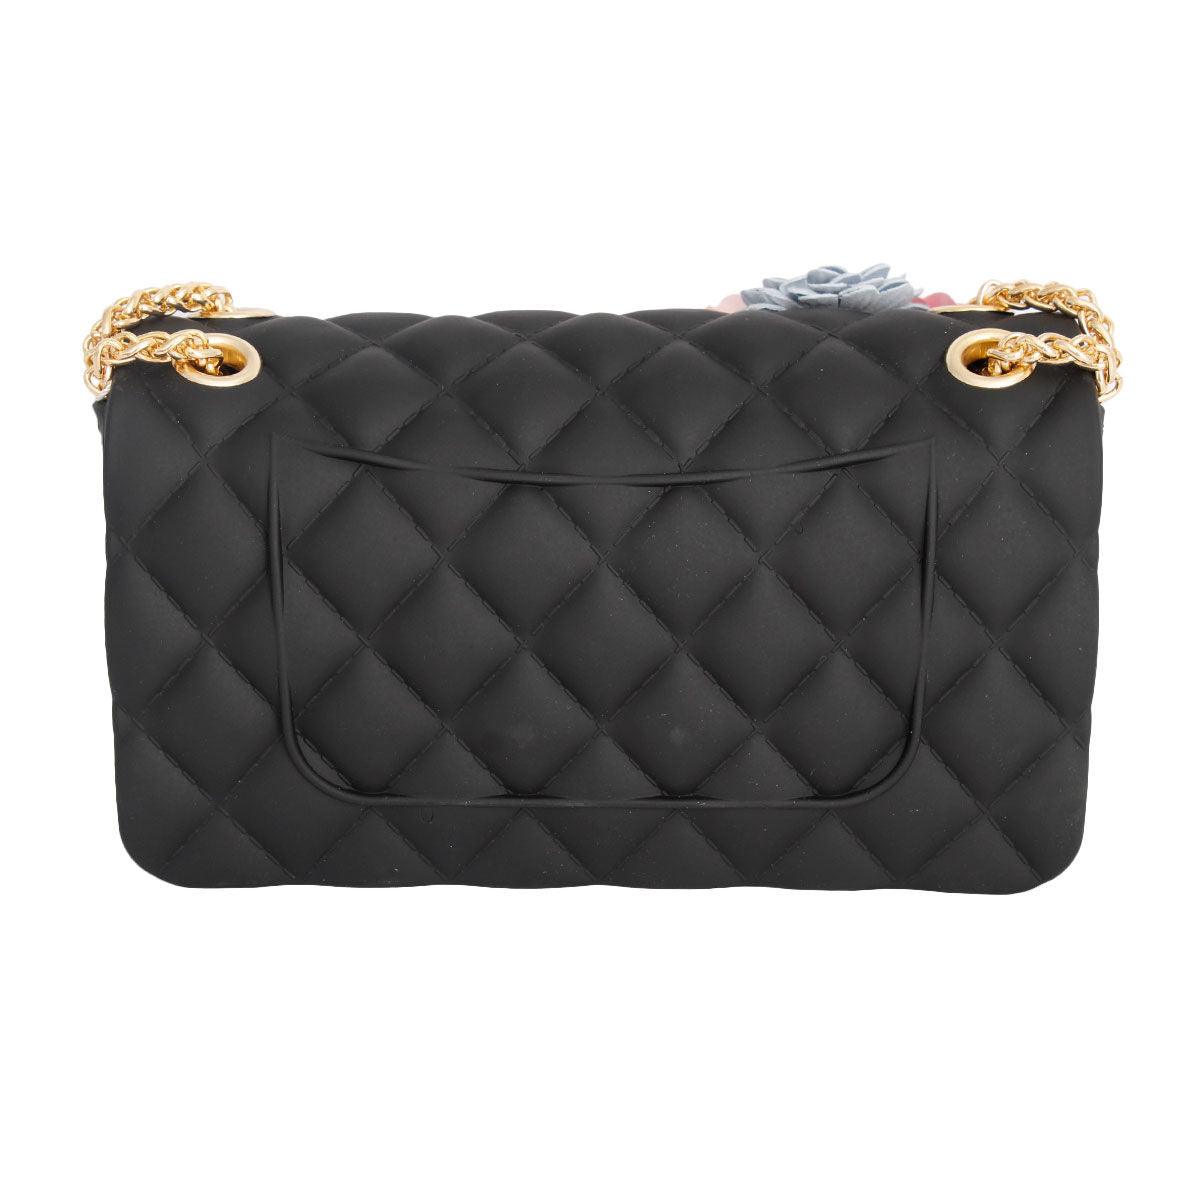 Make a Statement with a Stunning Black Quilted Jelly Crossbody Mini Bag